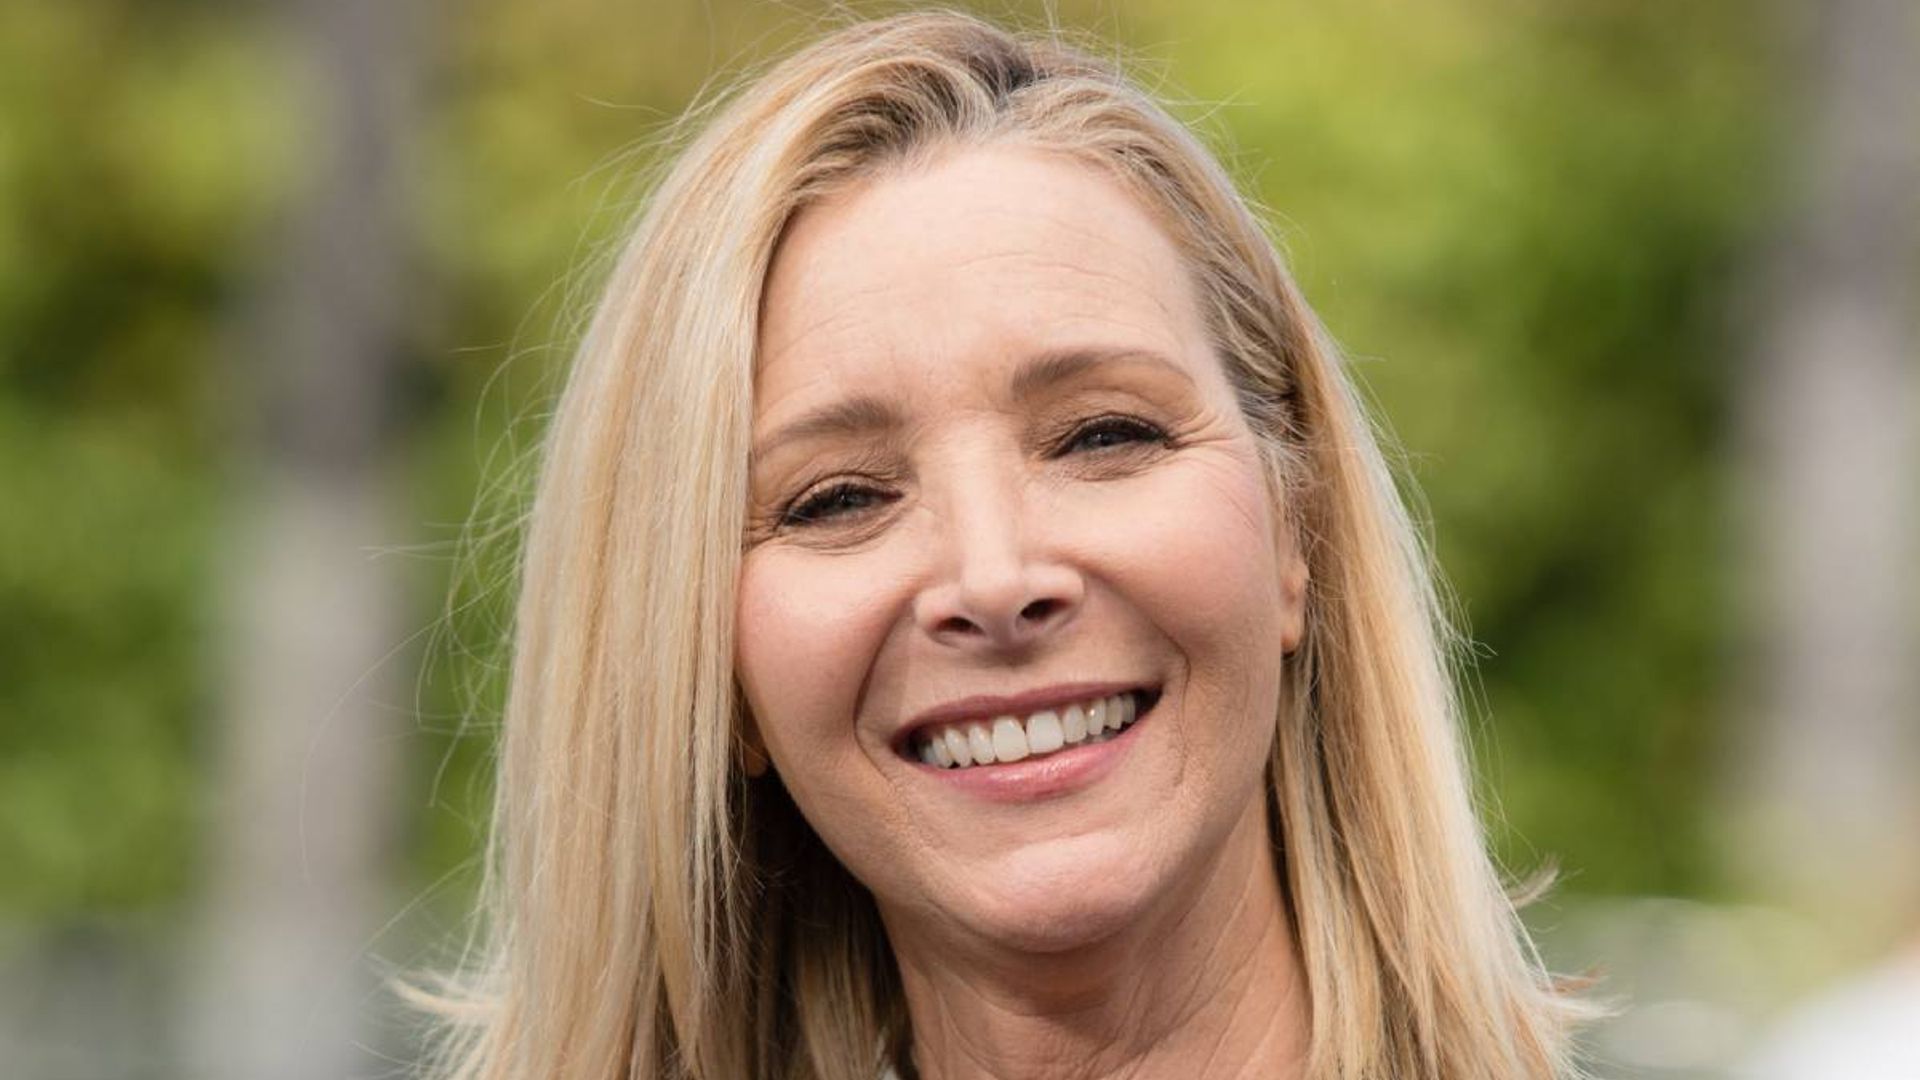 Friends Star Lisa Kudrow Shocks Fans With Unrecognisable Appearance And Pink Hair Hello